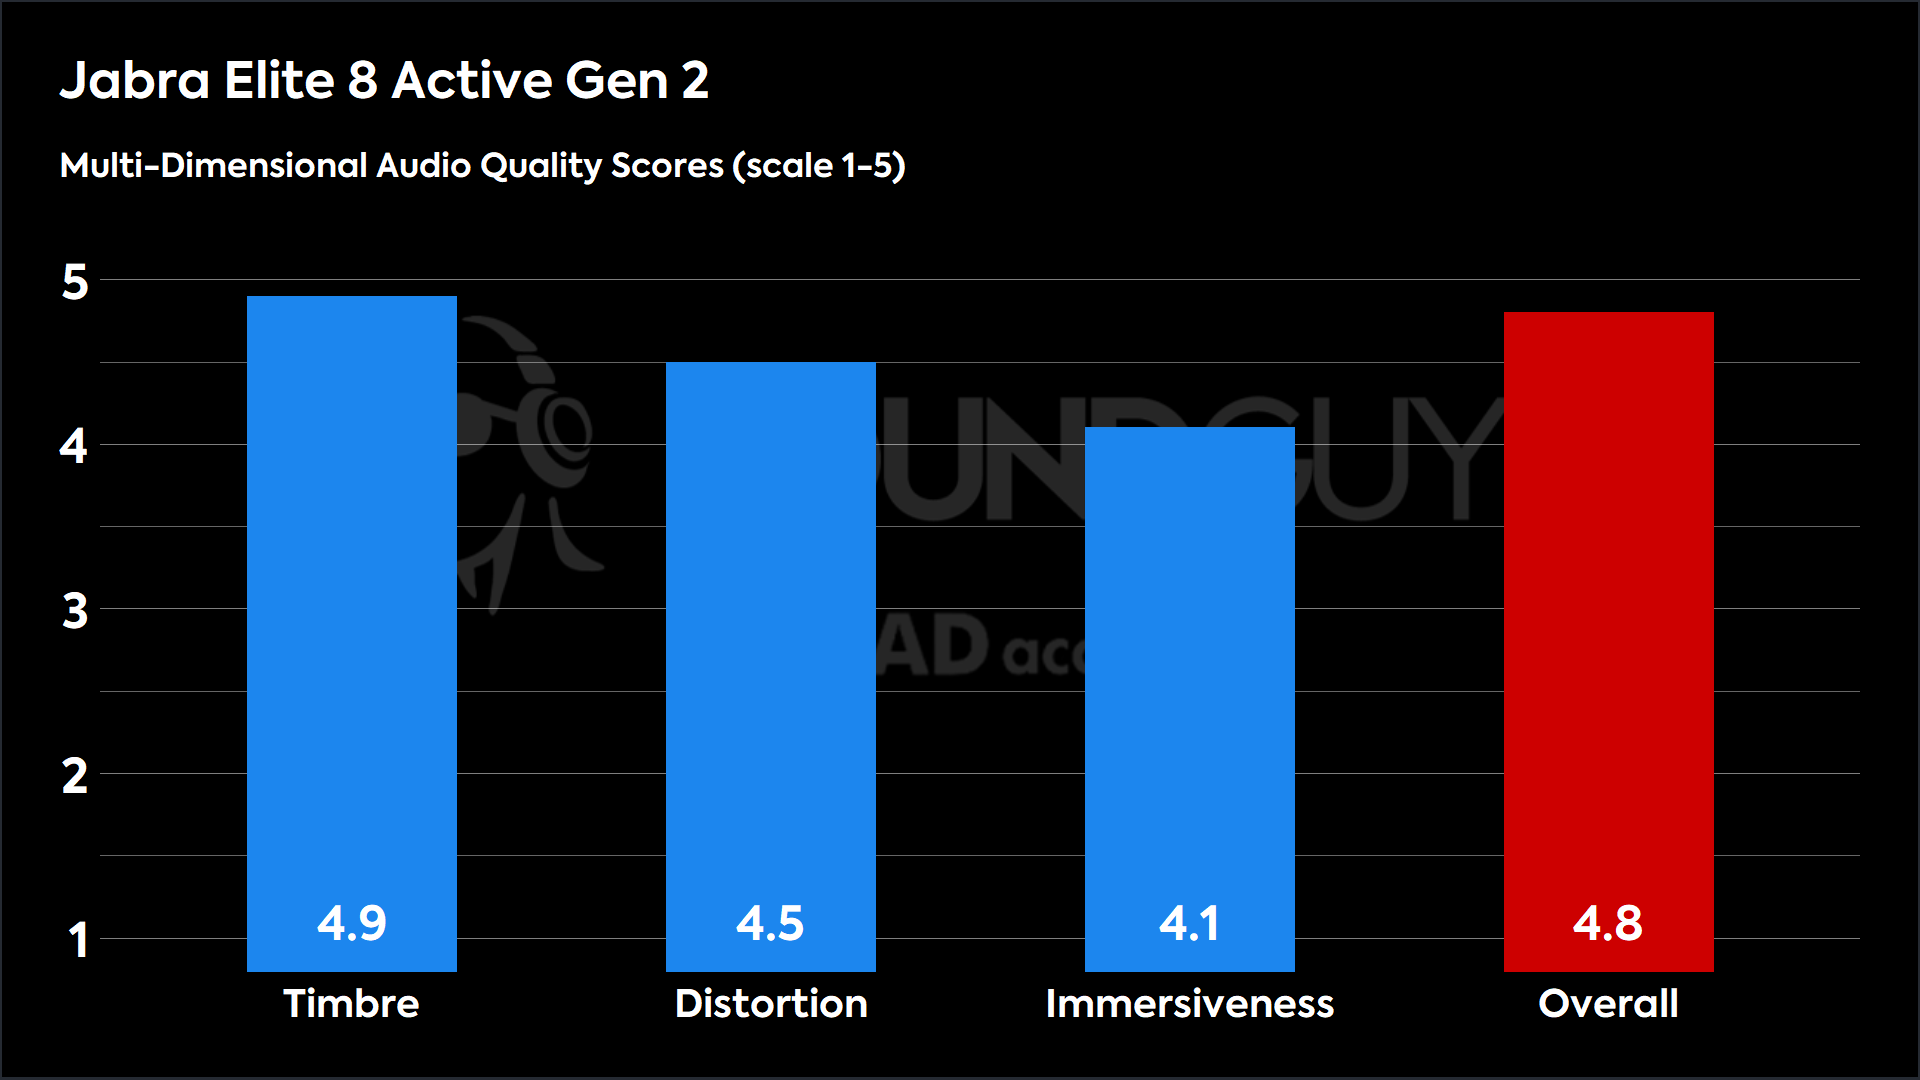 This chart shows the MDAQS results for the Jabra Elite 8 Active Gen 2 in Default mode. The Timbre score is 4.9, The Distortion score is 4.5, the Immersiveness score is 4.1, and the Overall Score is 4.8).